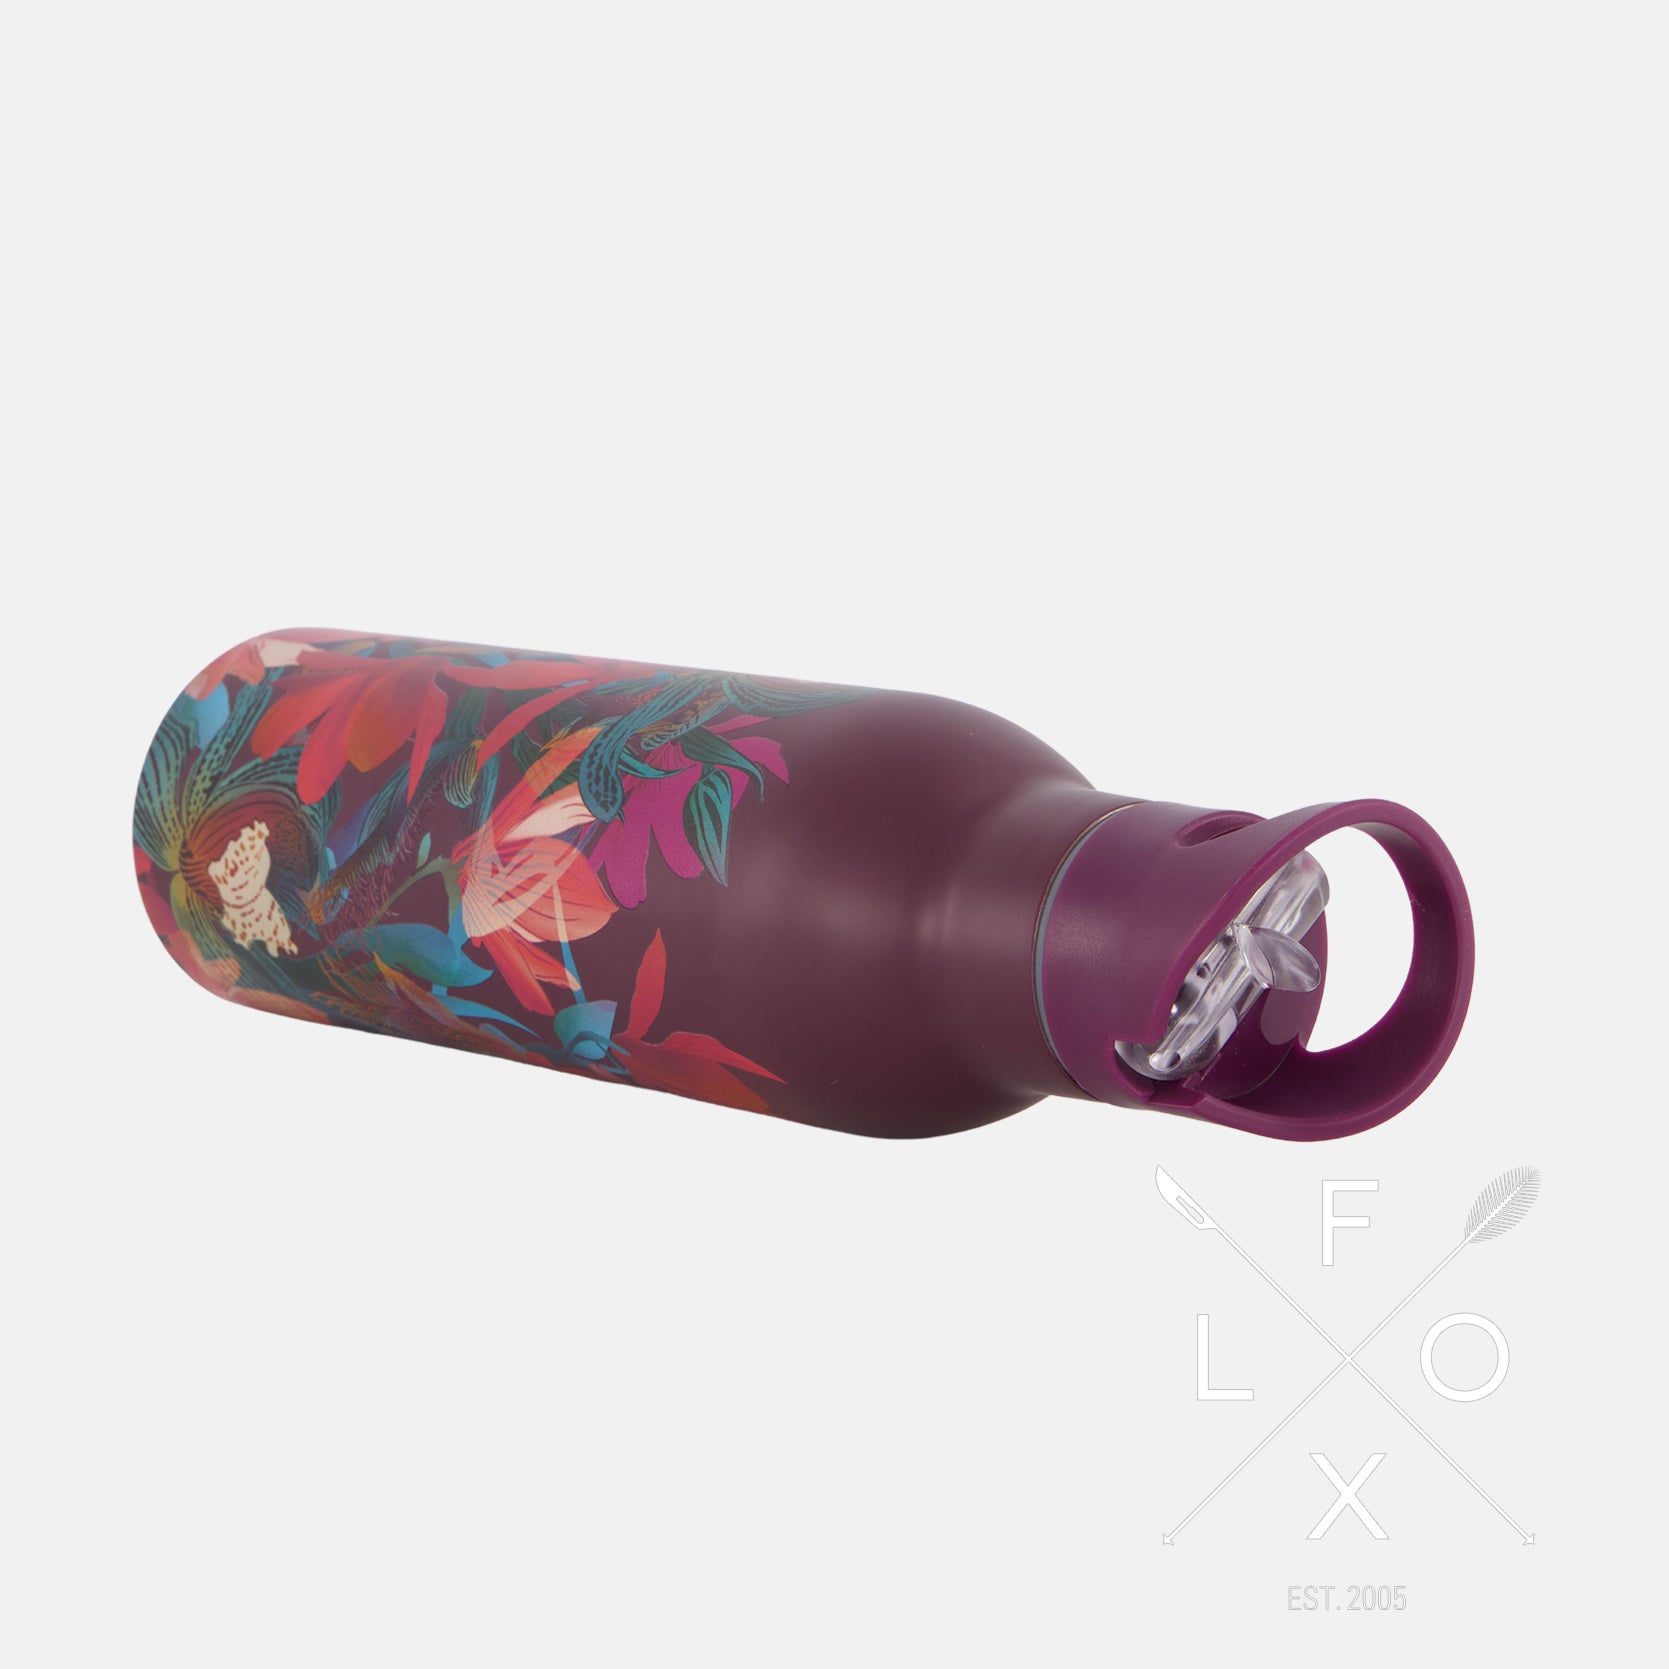 Flox Stainless Steel water bottle Orchid and Magnolia